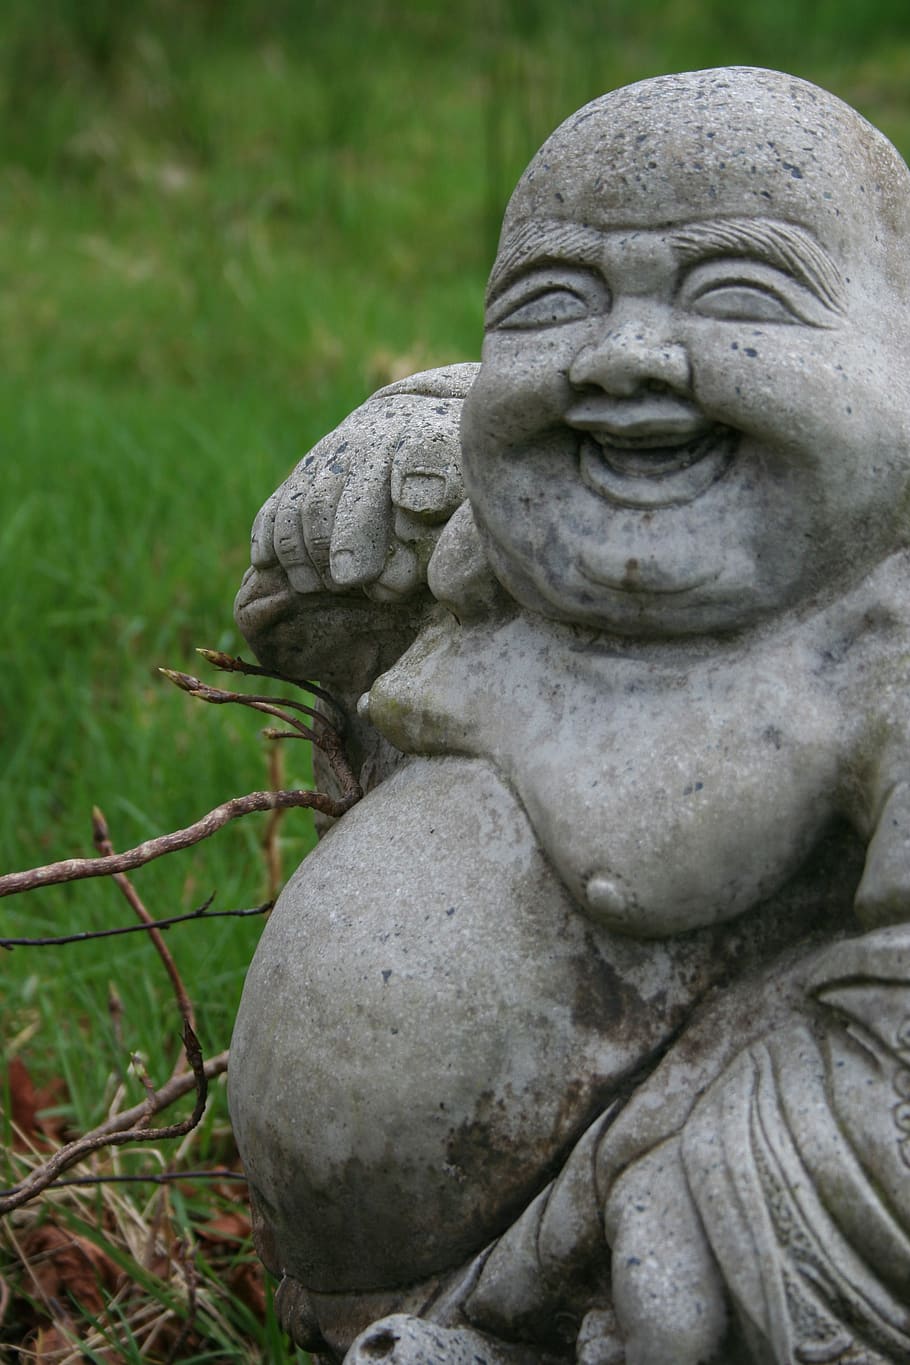 garden, status, laughing, laughing buddha statue, fun, funny, laughter, laugh, sculpture, art and craft